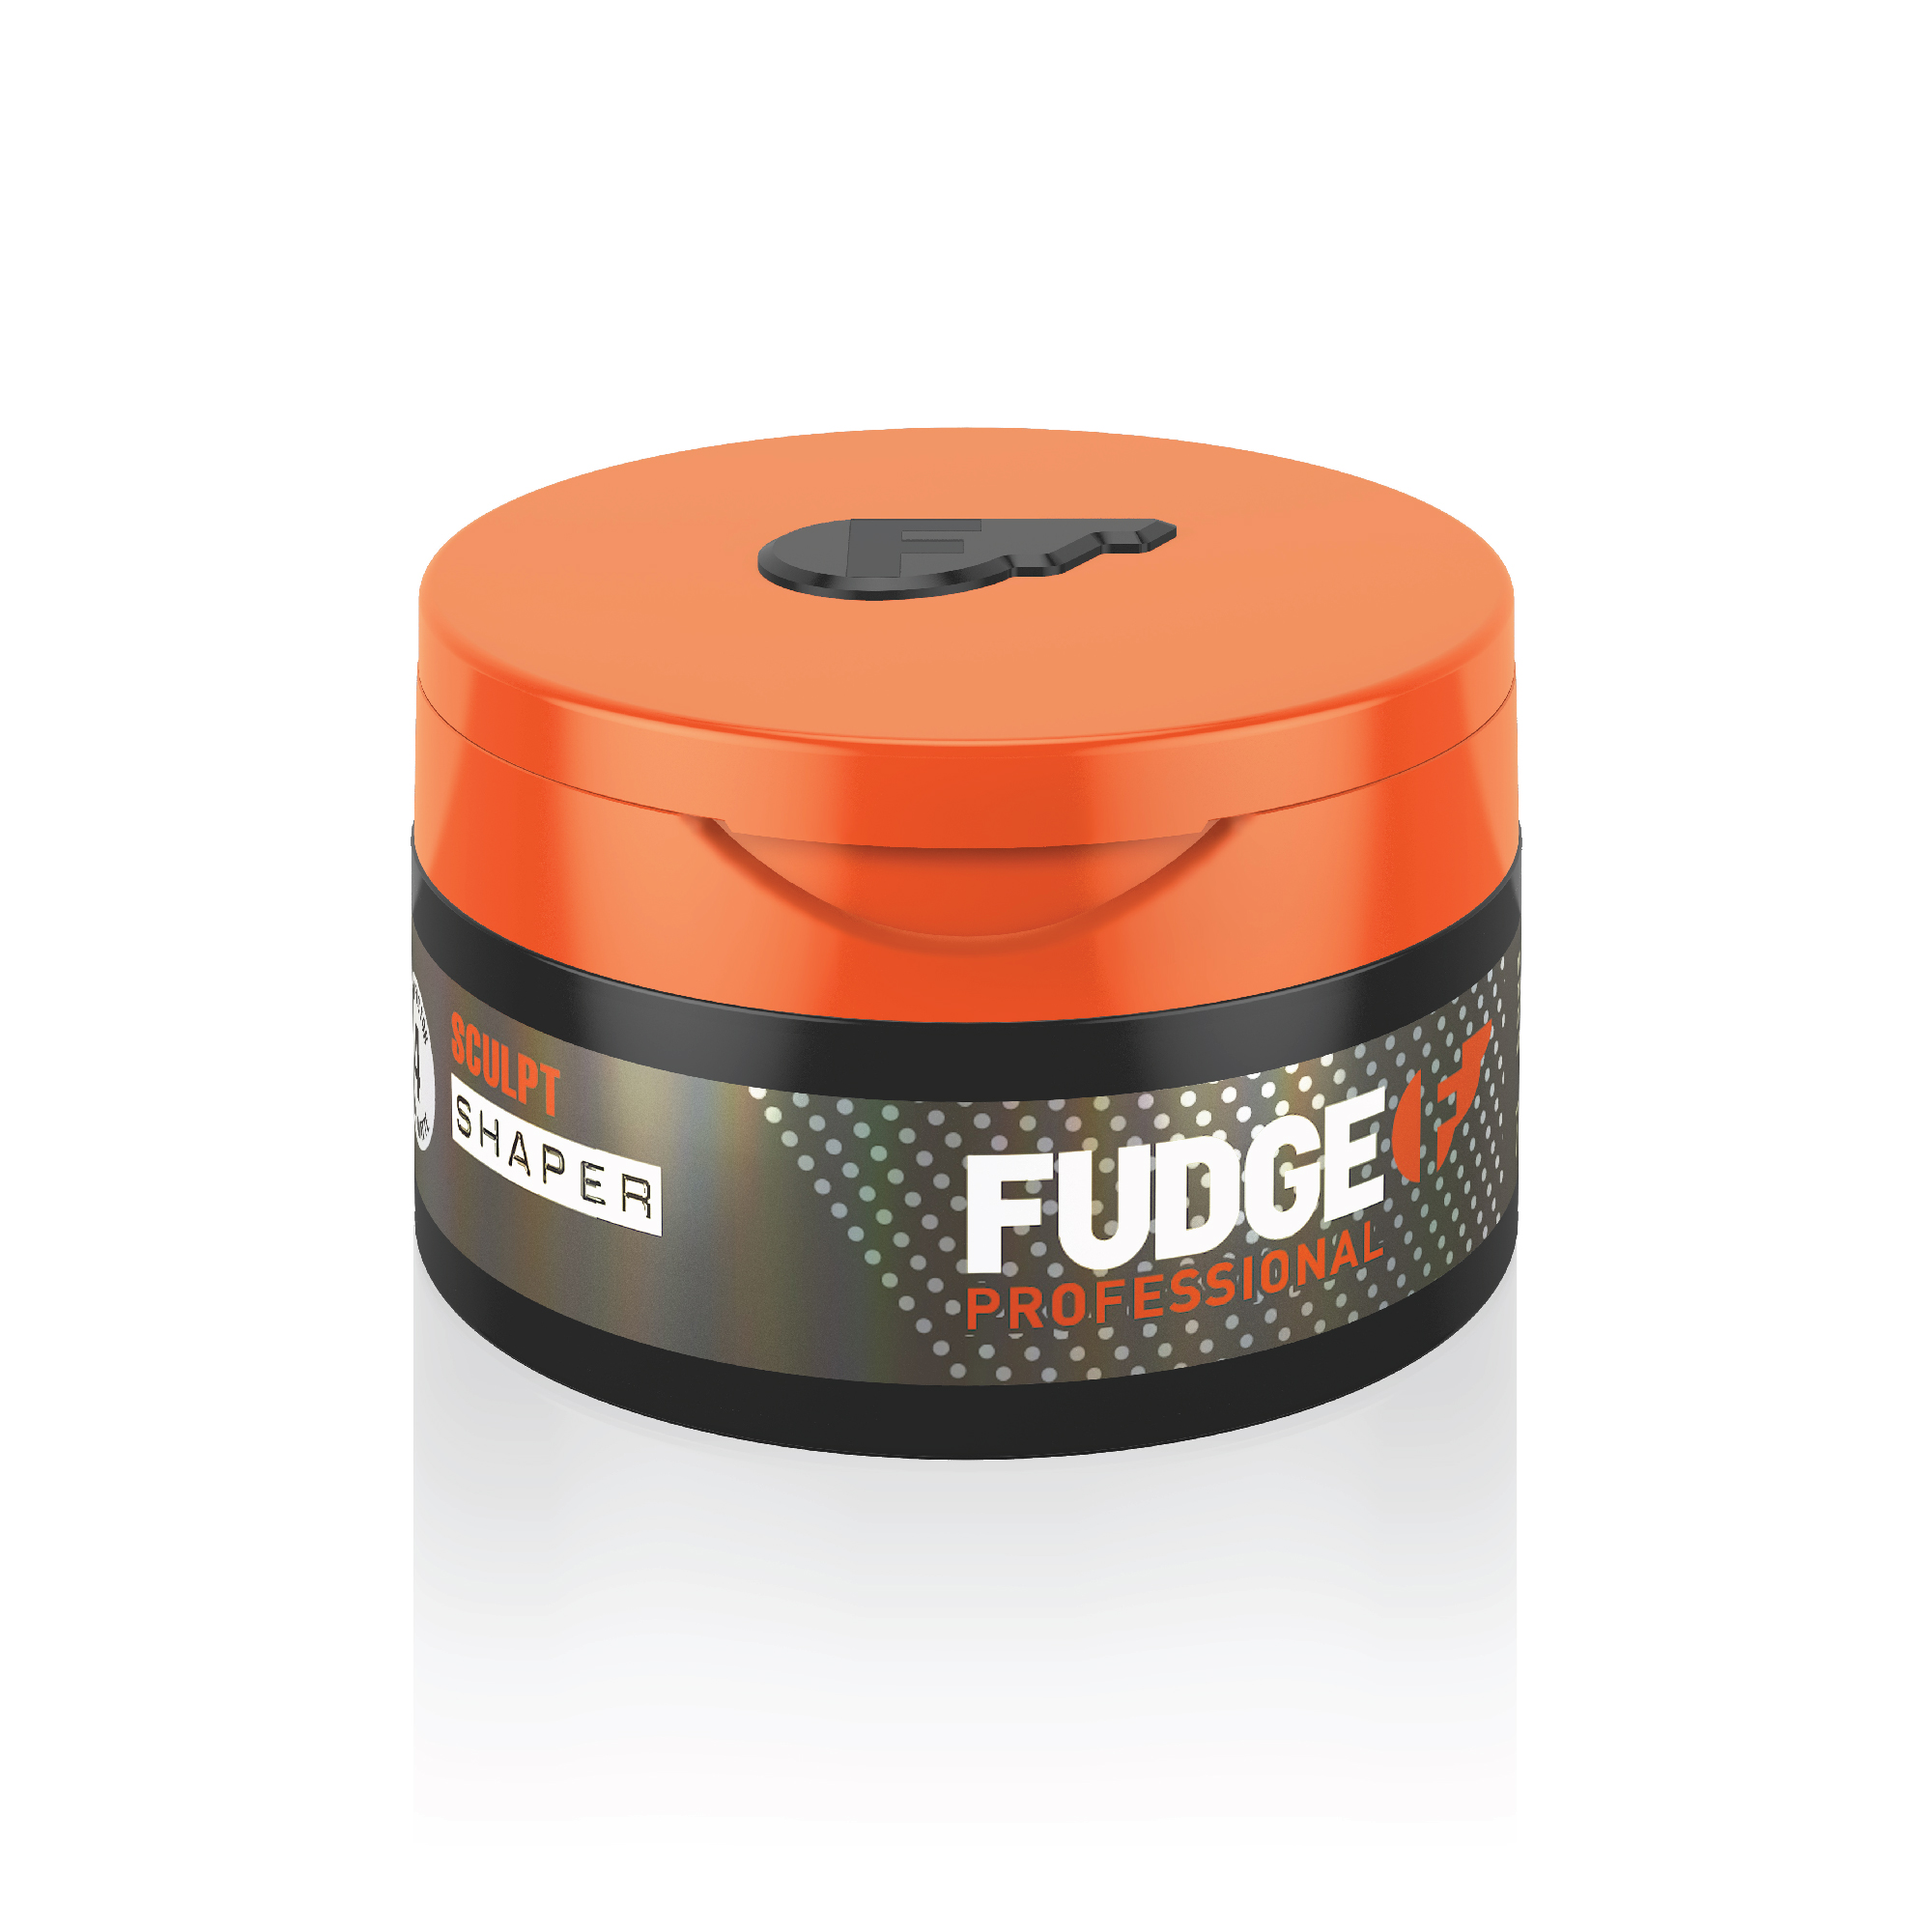 Fudge Shaper Original 75g - Hair products New Zealand | Nation wide  hairdressing & hair care group